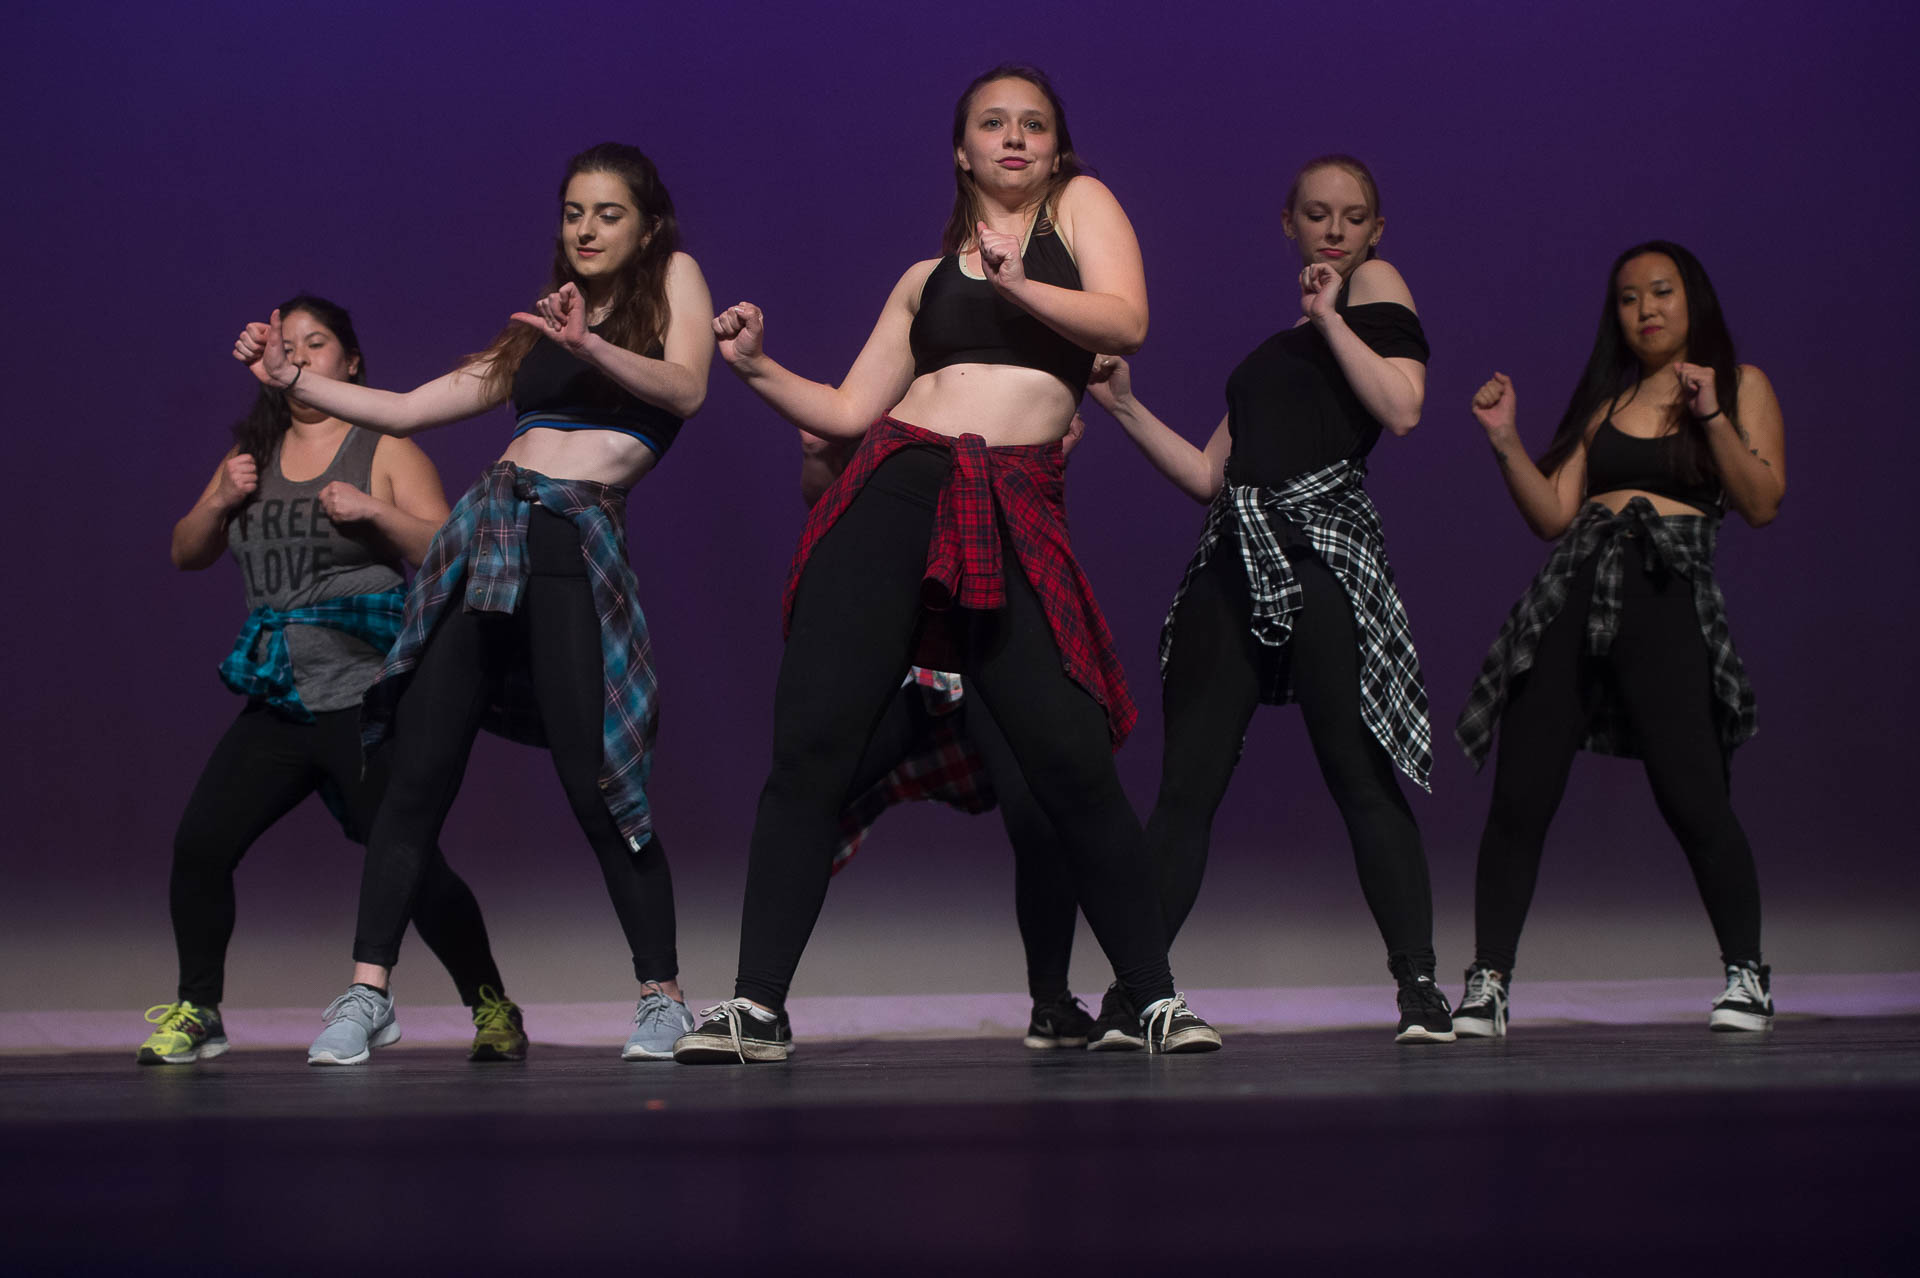 HipHop @ Tucson Academy of Music & Dance | Dance picture poses, Hip hop  dance poses, Draw the squad